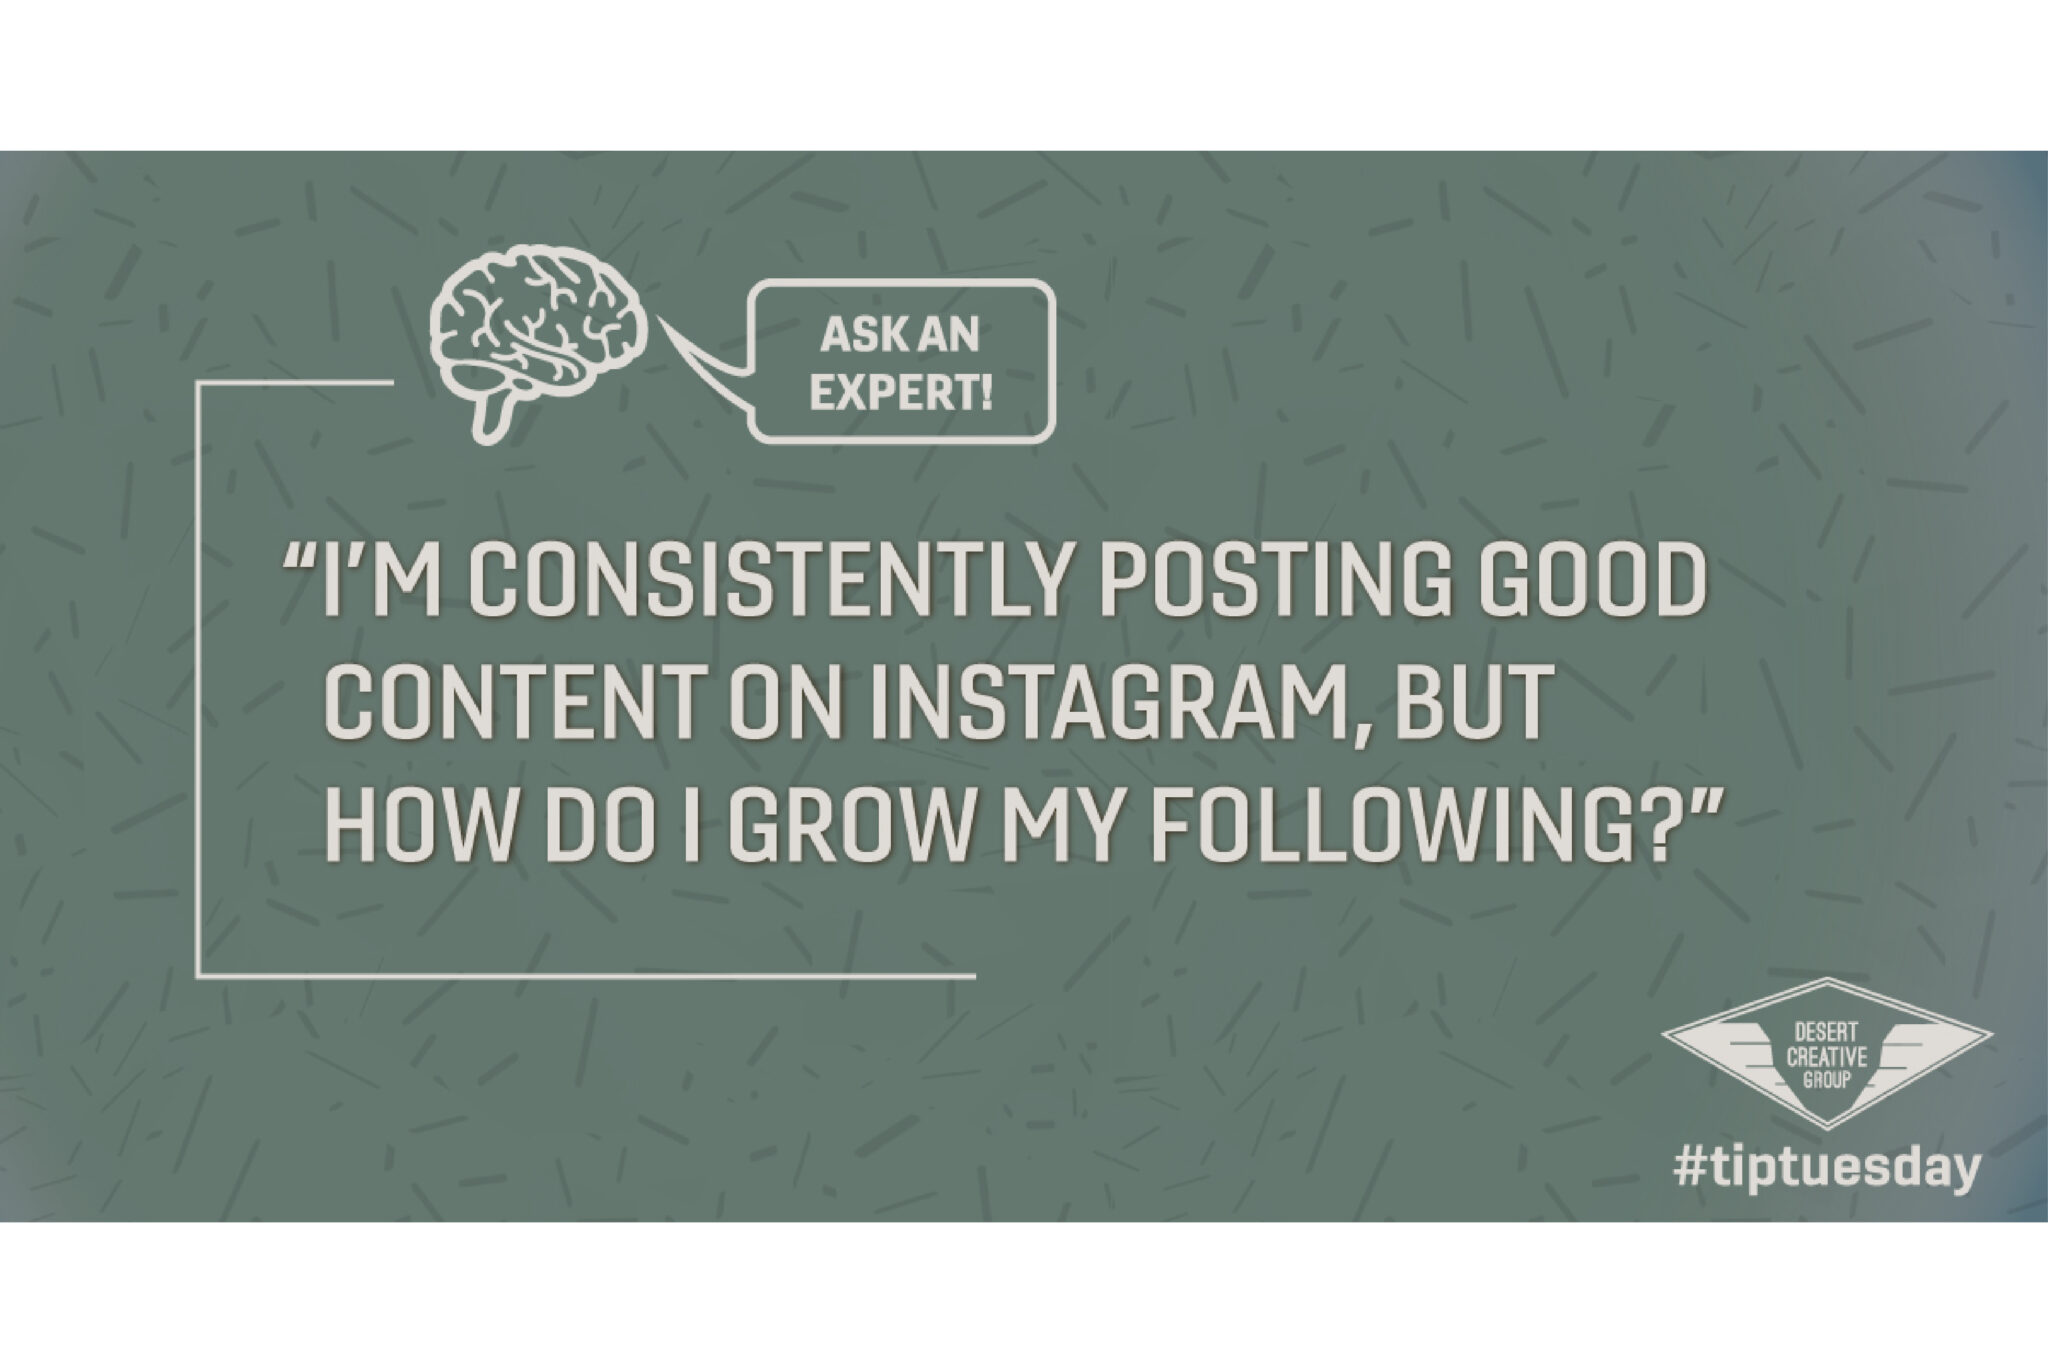 I'm Consistently posting good content on instagram, but how do I grow my following?"